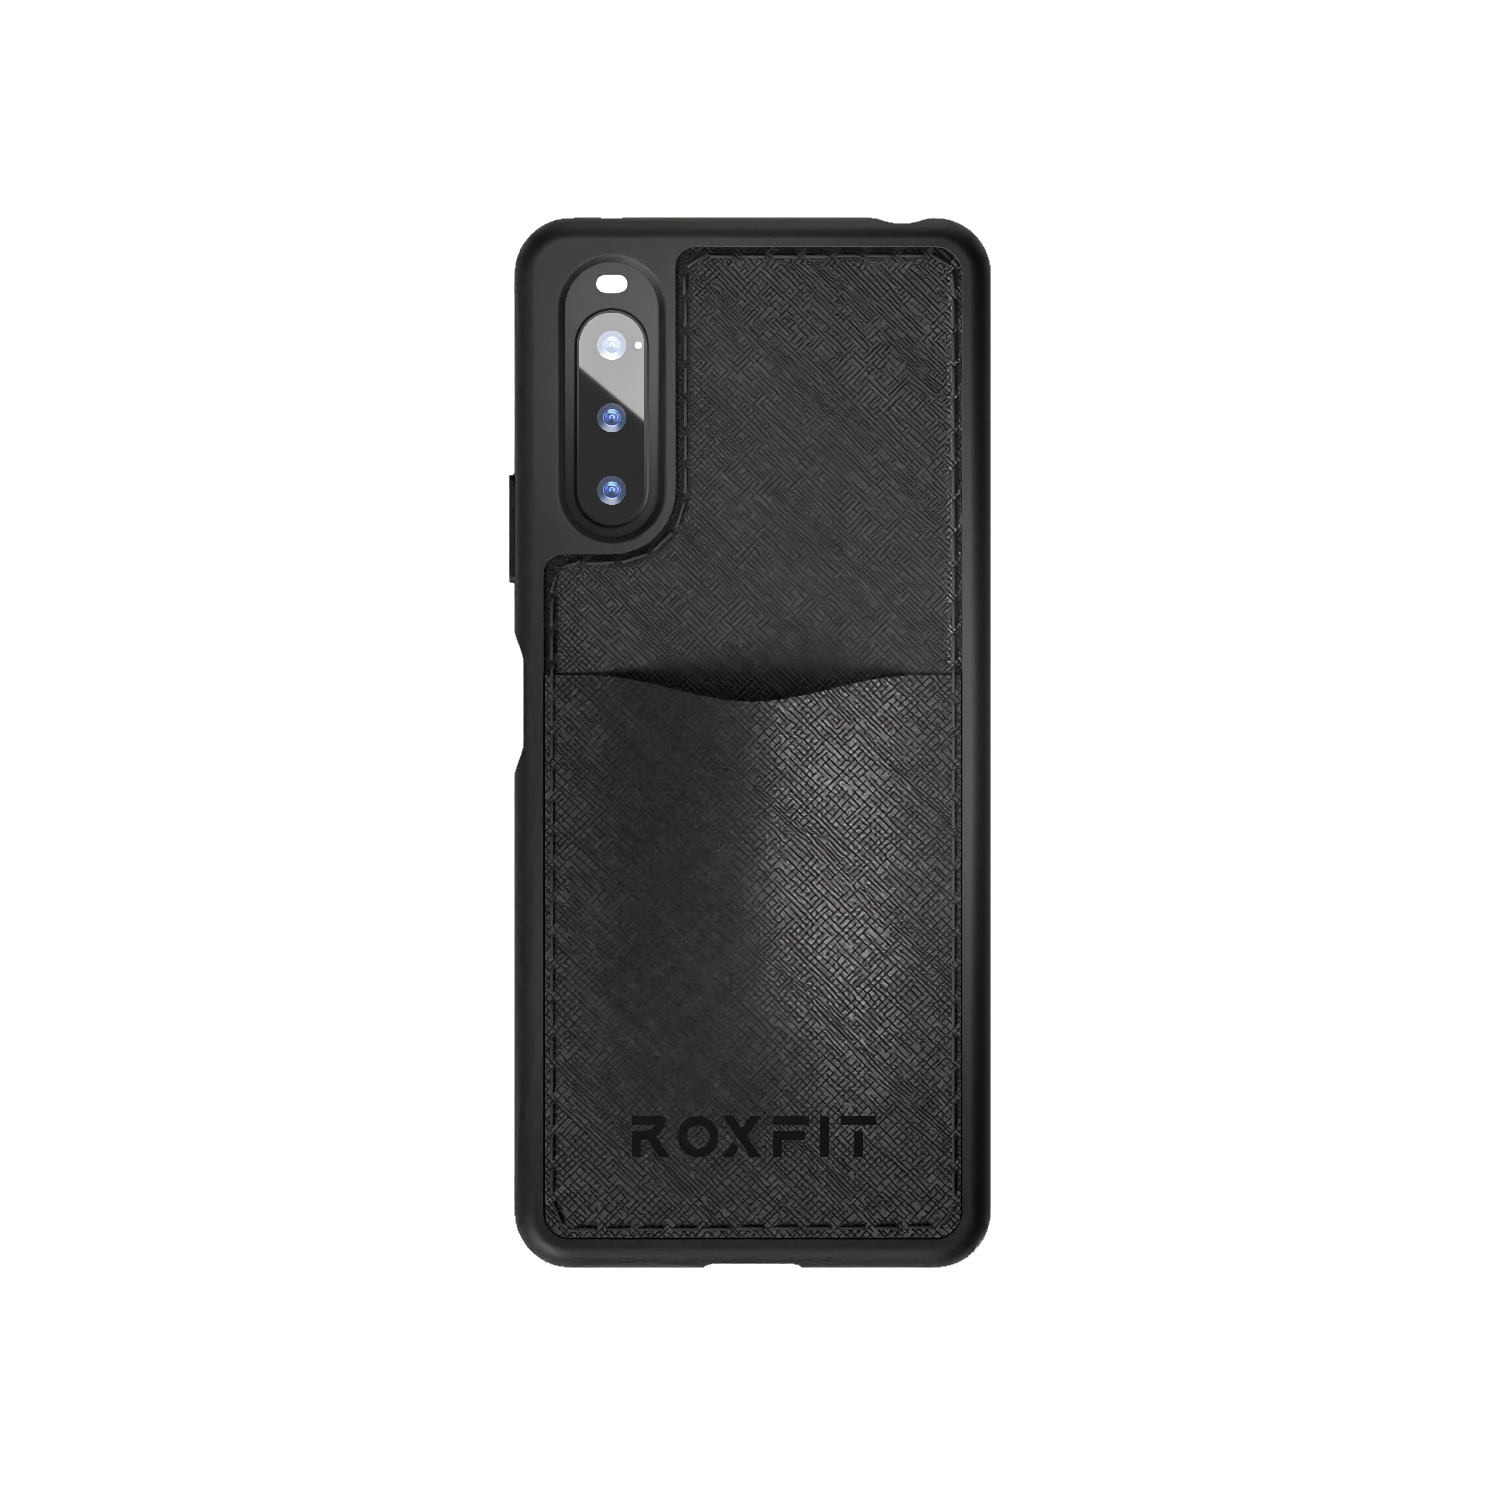 Roxfit Pocket Case with Tempered Glass for Sony Xperia 10 IV (Black), , large image number 2